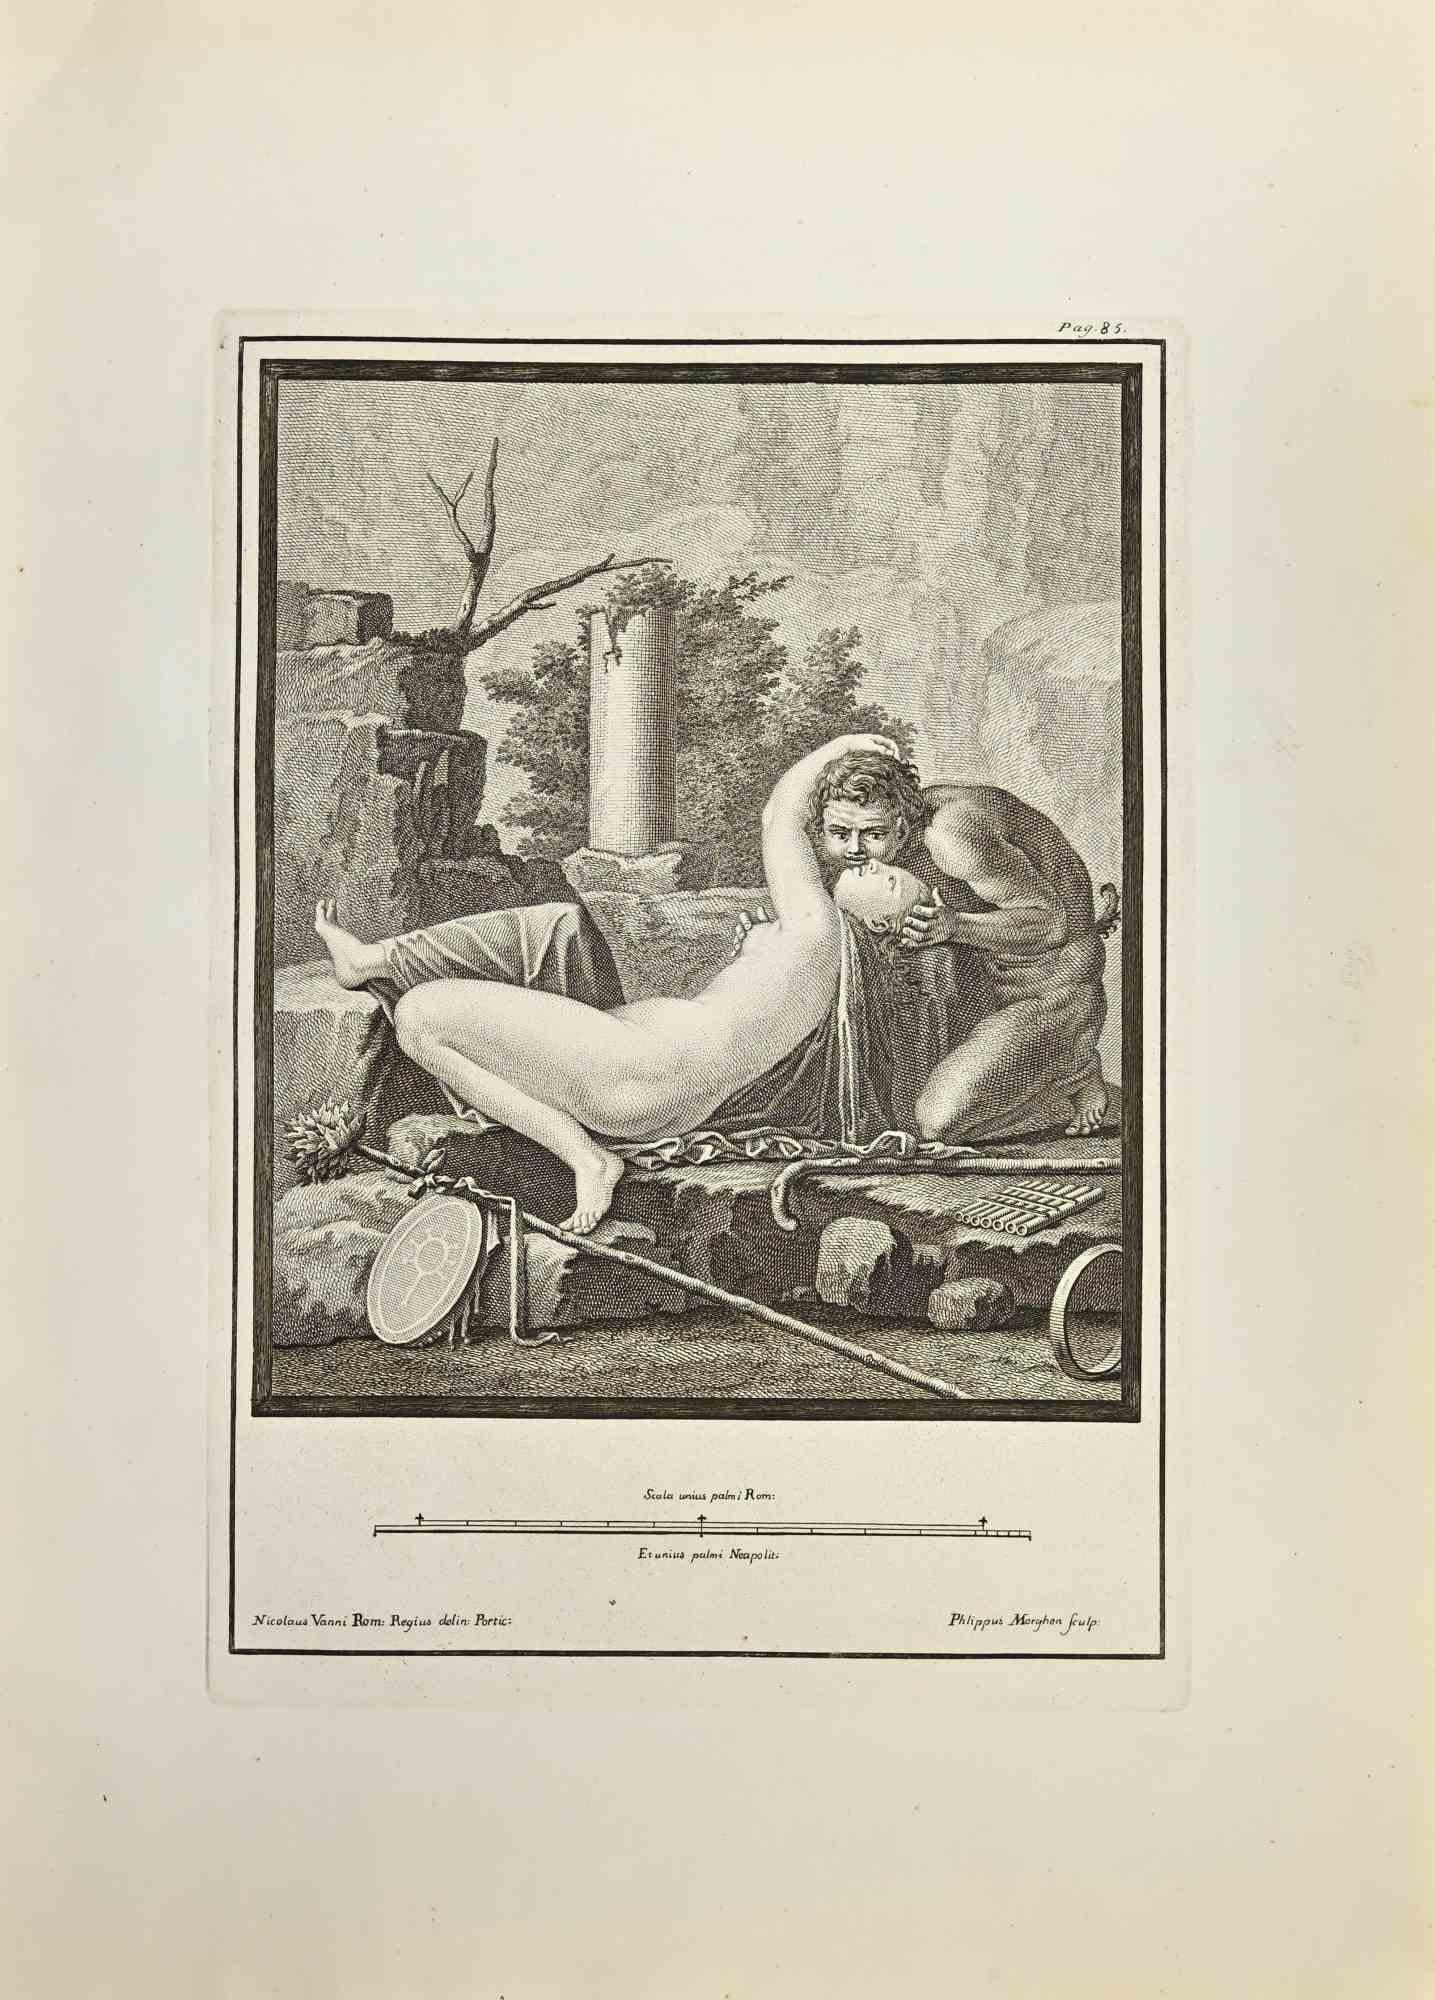 Pan and Nude from "Antiquities of Herculaneum" is an etching on paper realized by Filippo Morghen in the 18th Century.

Signed on the plate.

Good conditions with some foxing and folding due to the time.

The etching belongs to the print suite